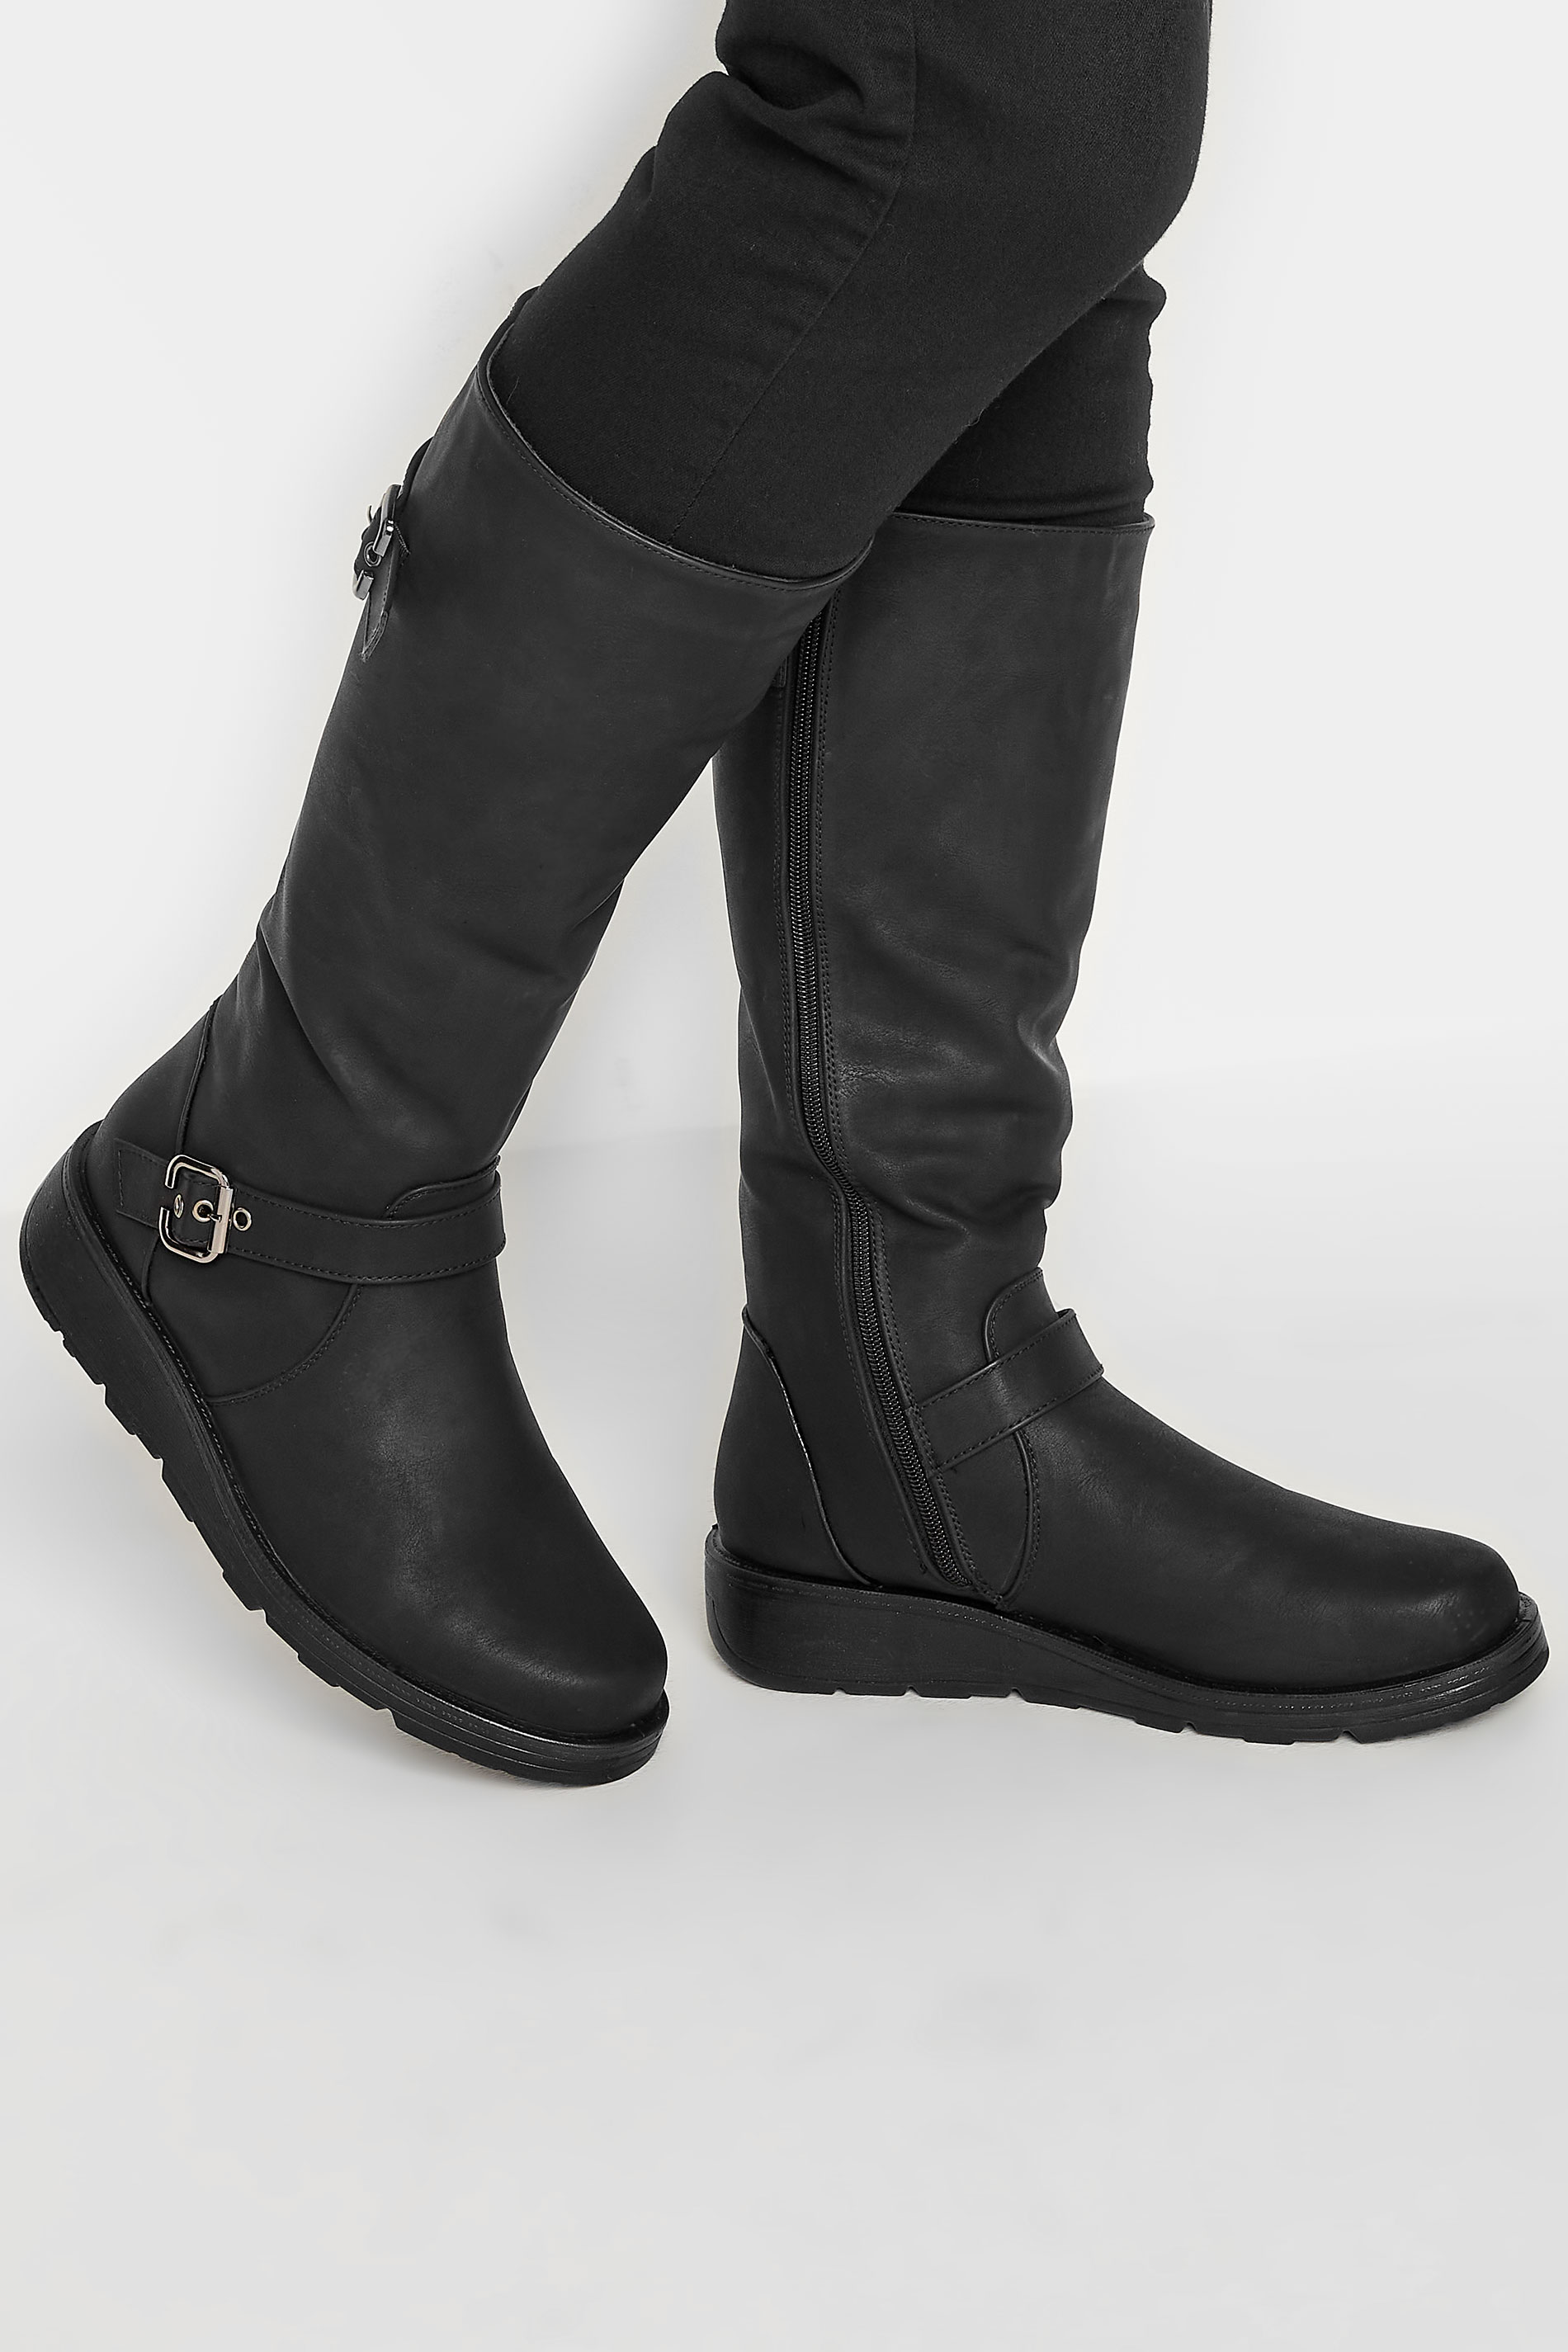 Black Knee High Wedge Boots In Wide E Fit | Yours Clothing 1